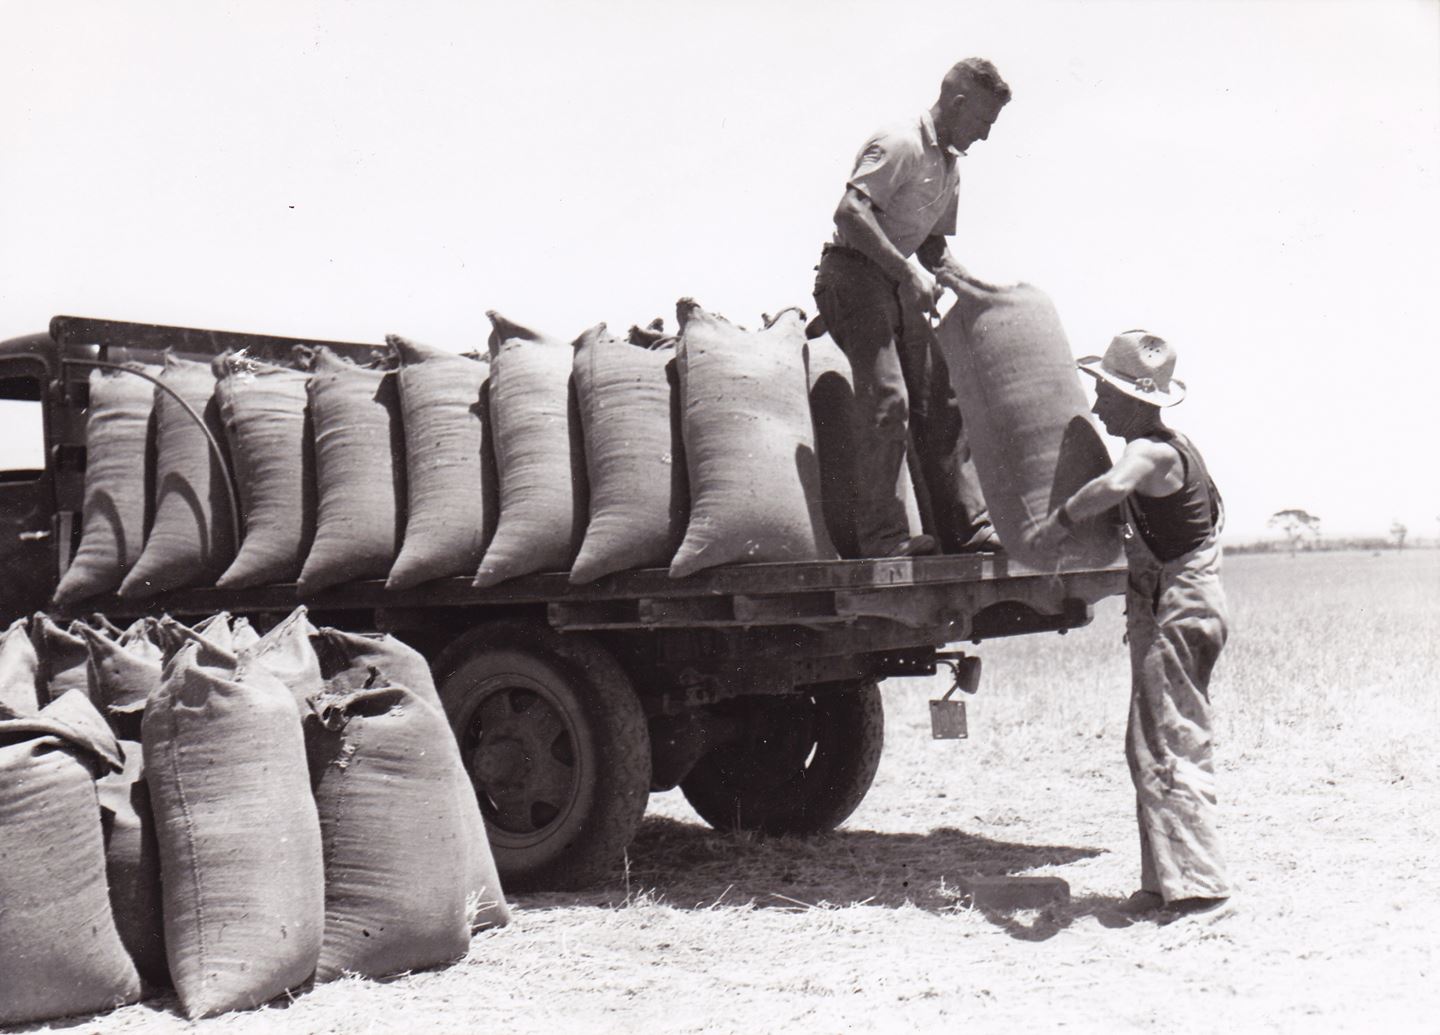 Black and white image showing two men unloading grain bags from a truck